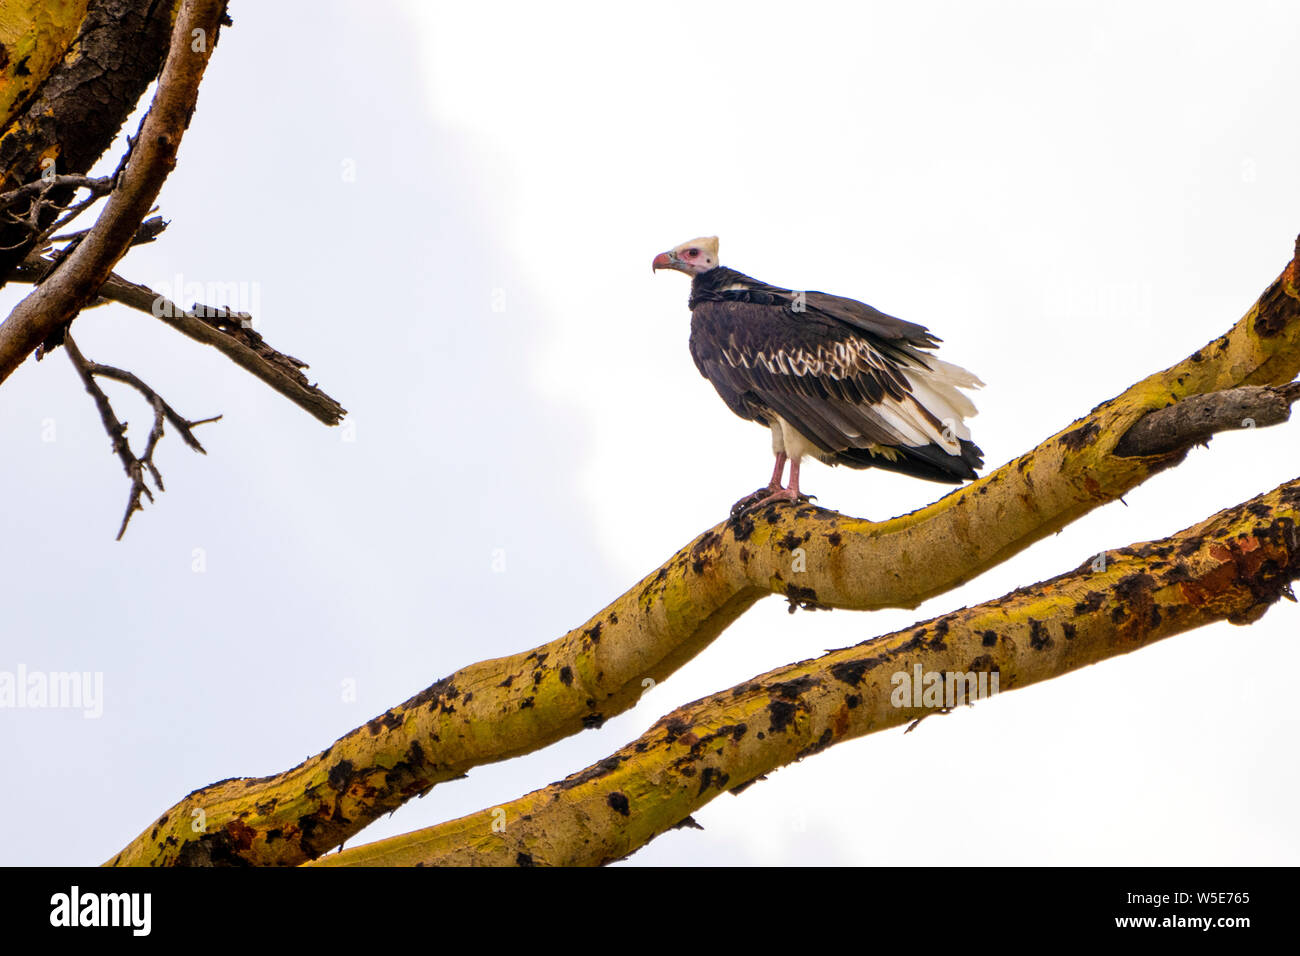 White-headed vulture (Trigonoceps occipitalis) Critically endangered bird species endemic to Africa. Photographed at Serengeti National Park, Tanzania Stock Photo